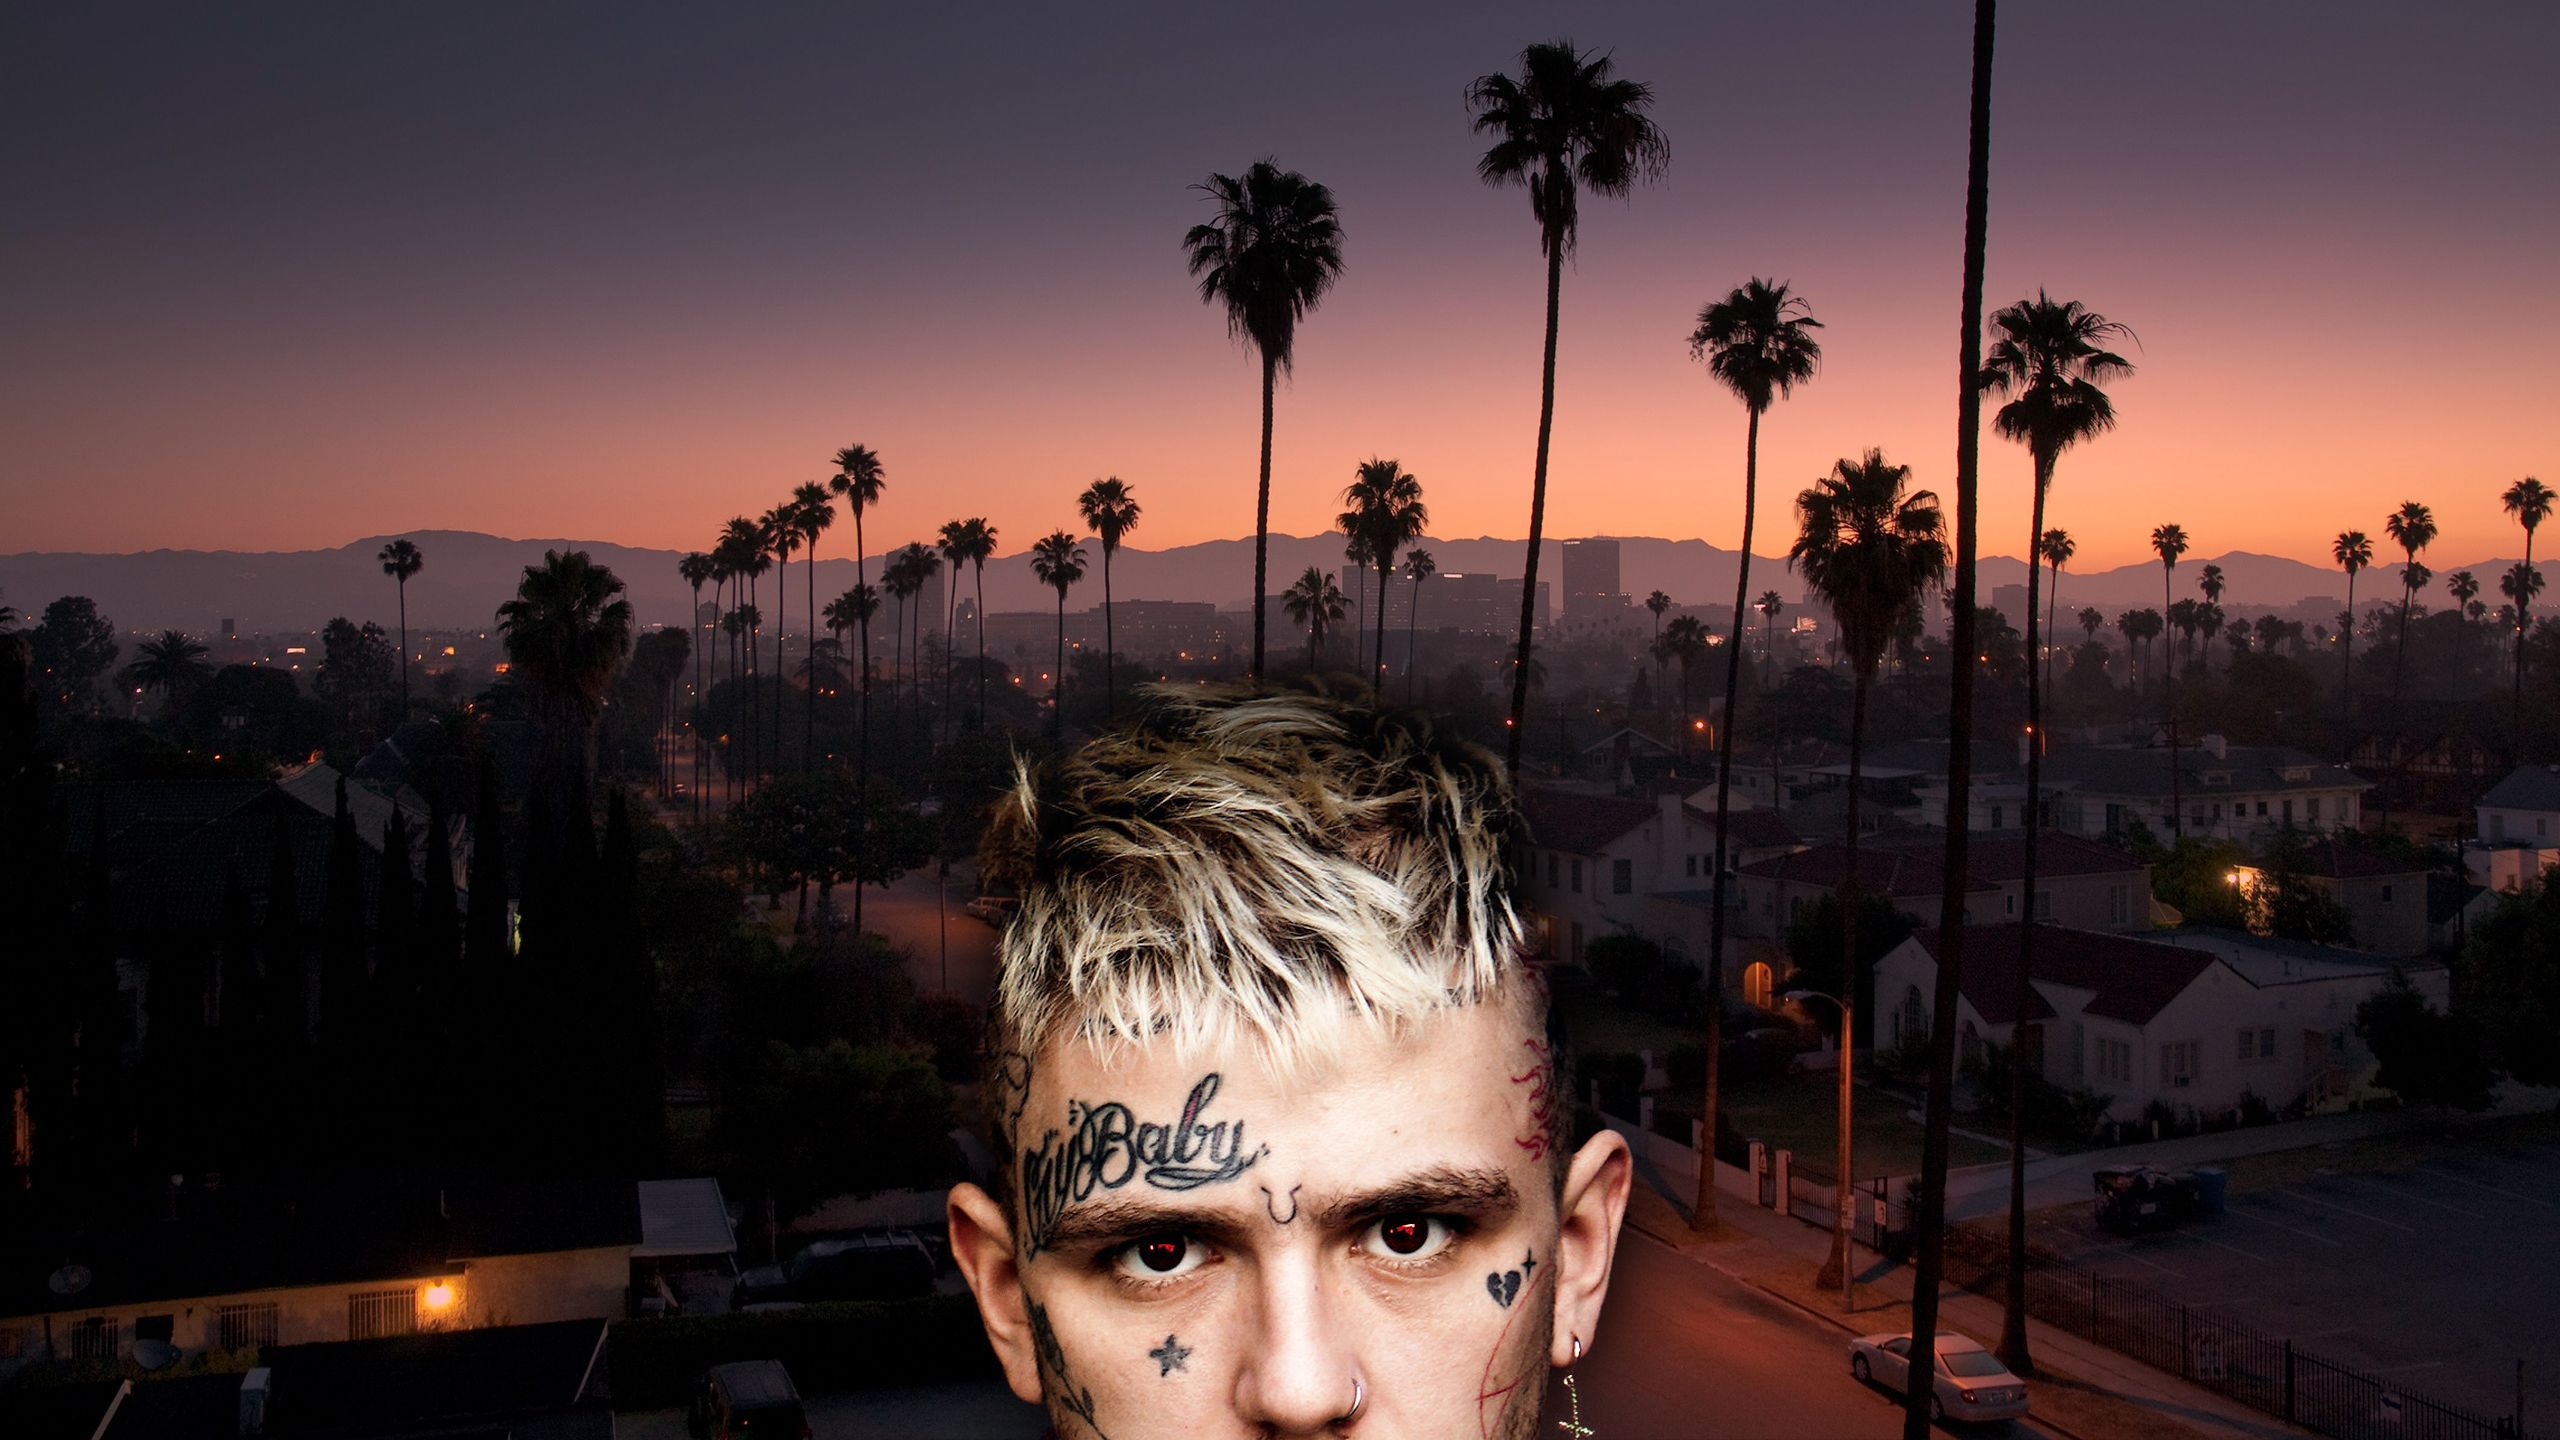 Lilpeep Crybaby Red Eyes Blonde Tattoo Lil Peep Wallpaper:2560x1440